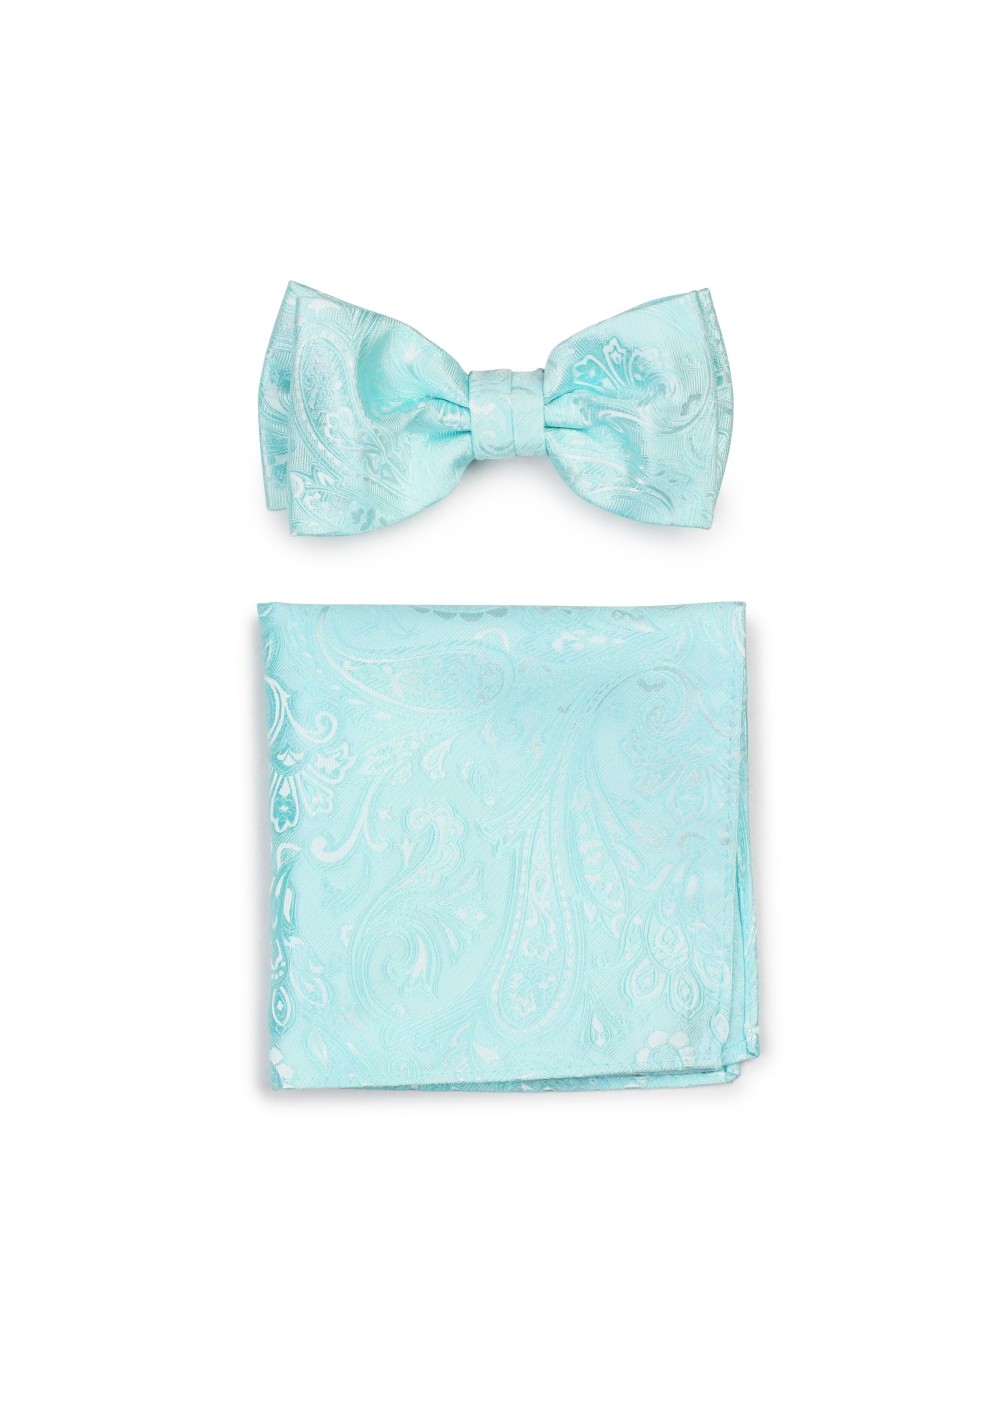 Dressy Summer Bow Tie and Hanky Set in Robins Egg Blue